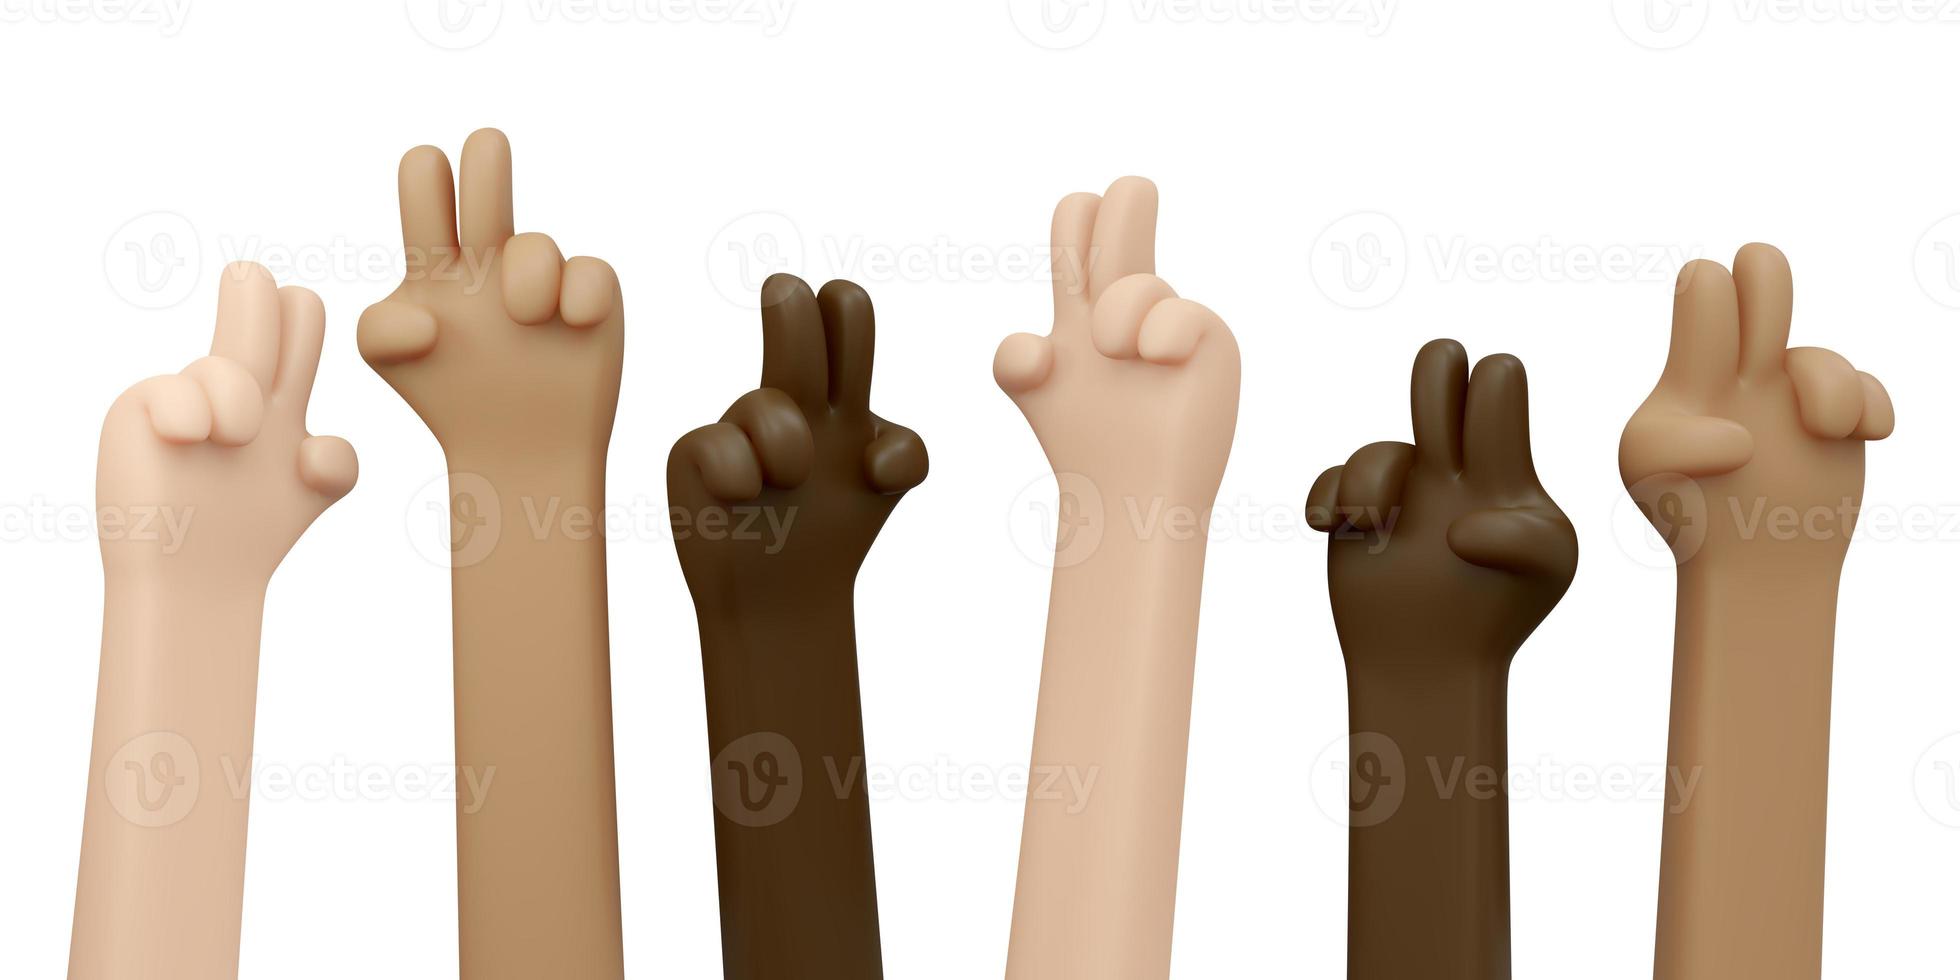 3D Rendering of hands in many color skin gesturing peace sign isolated on white background banner concept of no war stop fighting save the world. 3D Render illustration cartoon style. photo